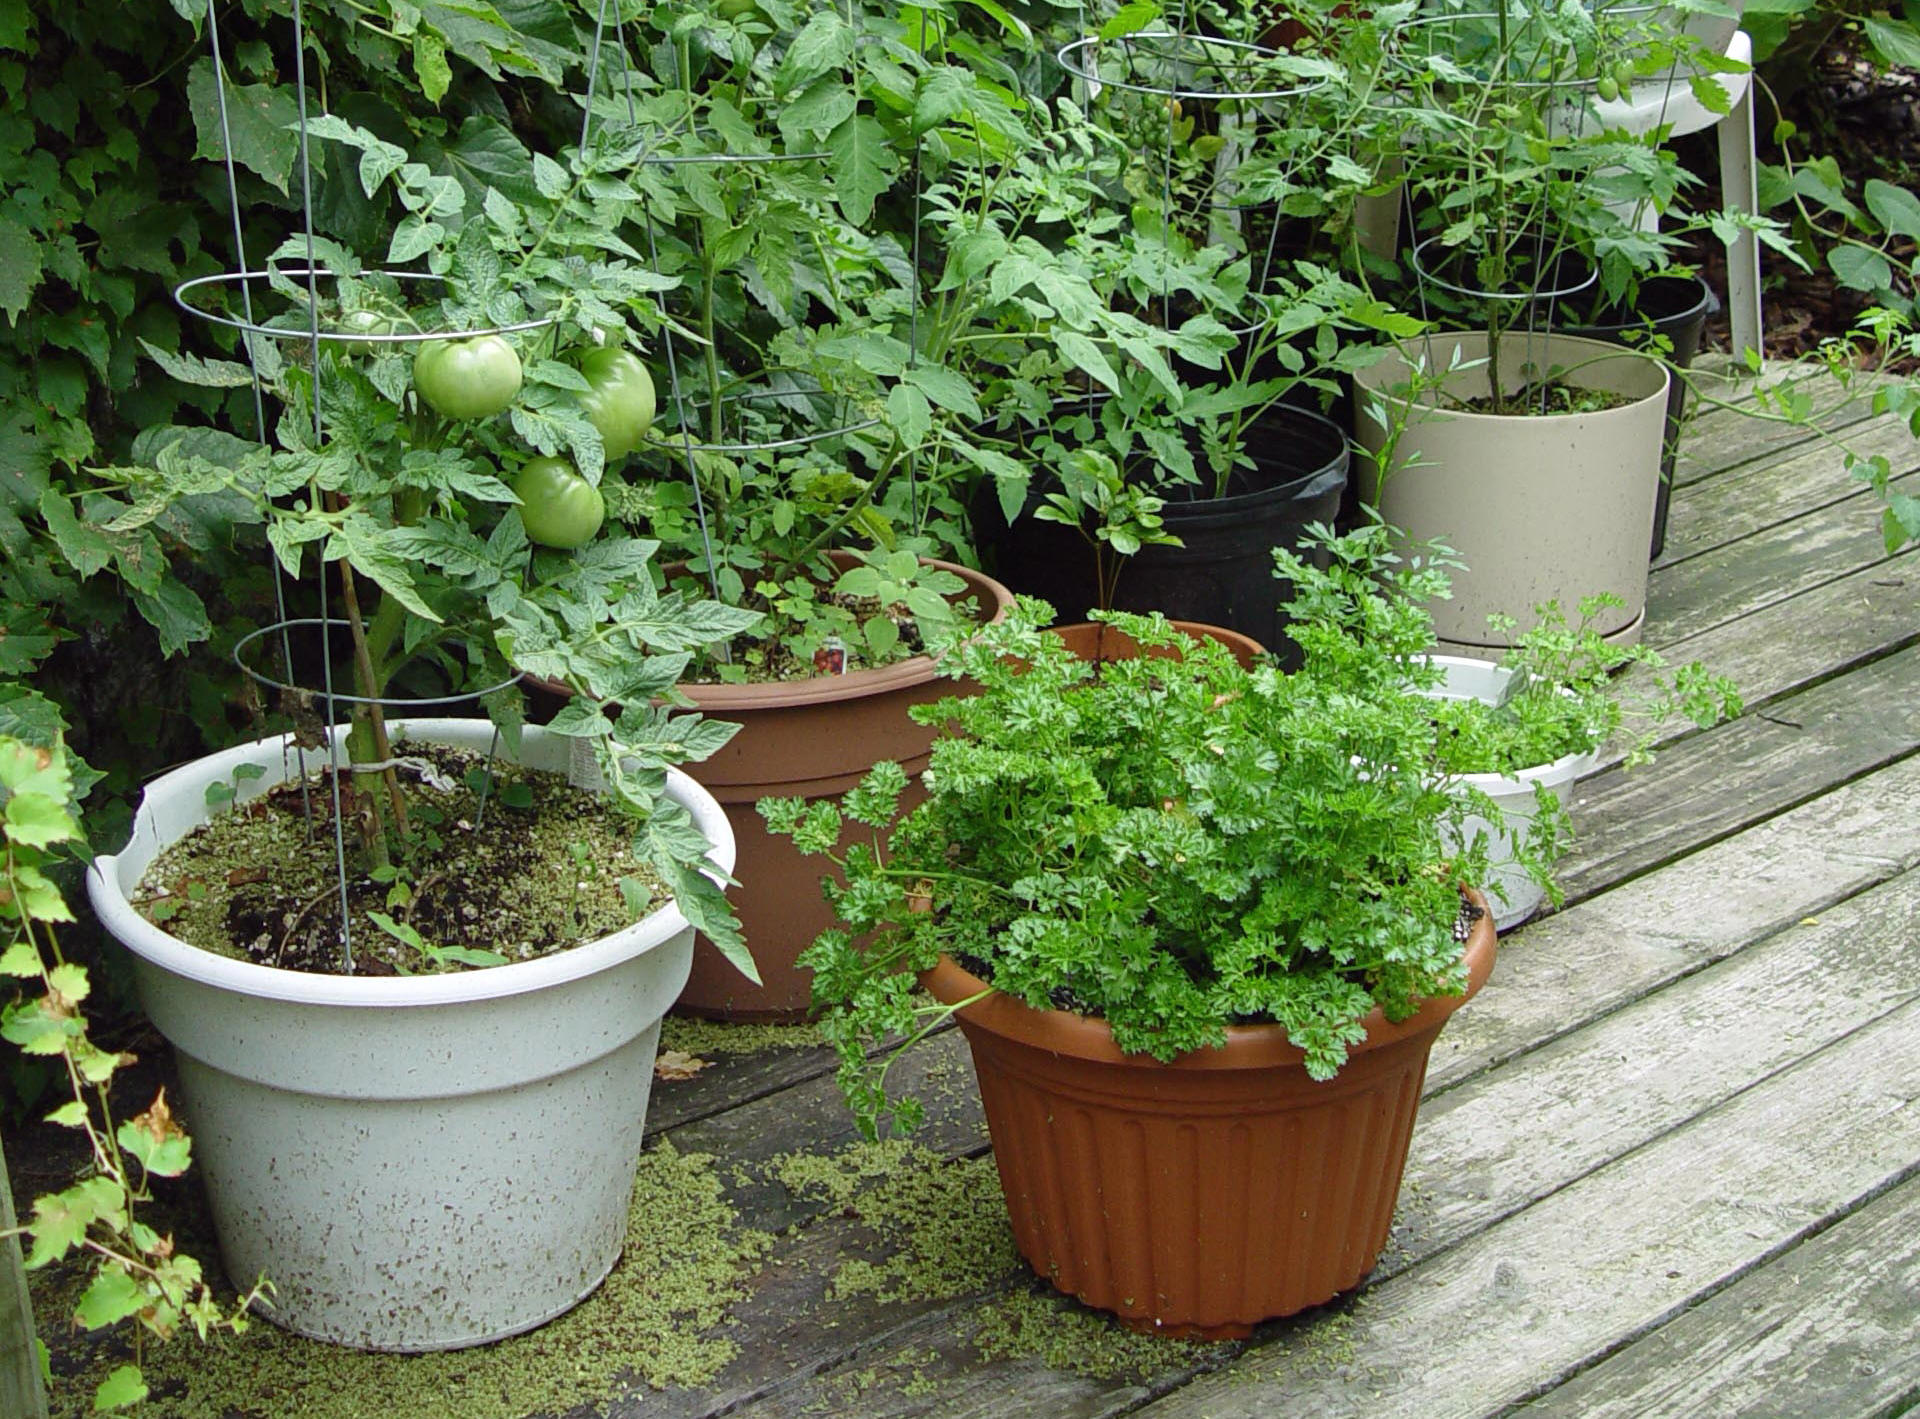 Garden Housecalls - Grow Vegetables in the Shade? It’s Possible…